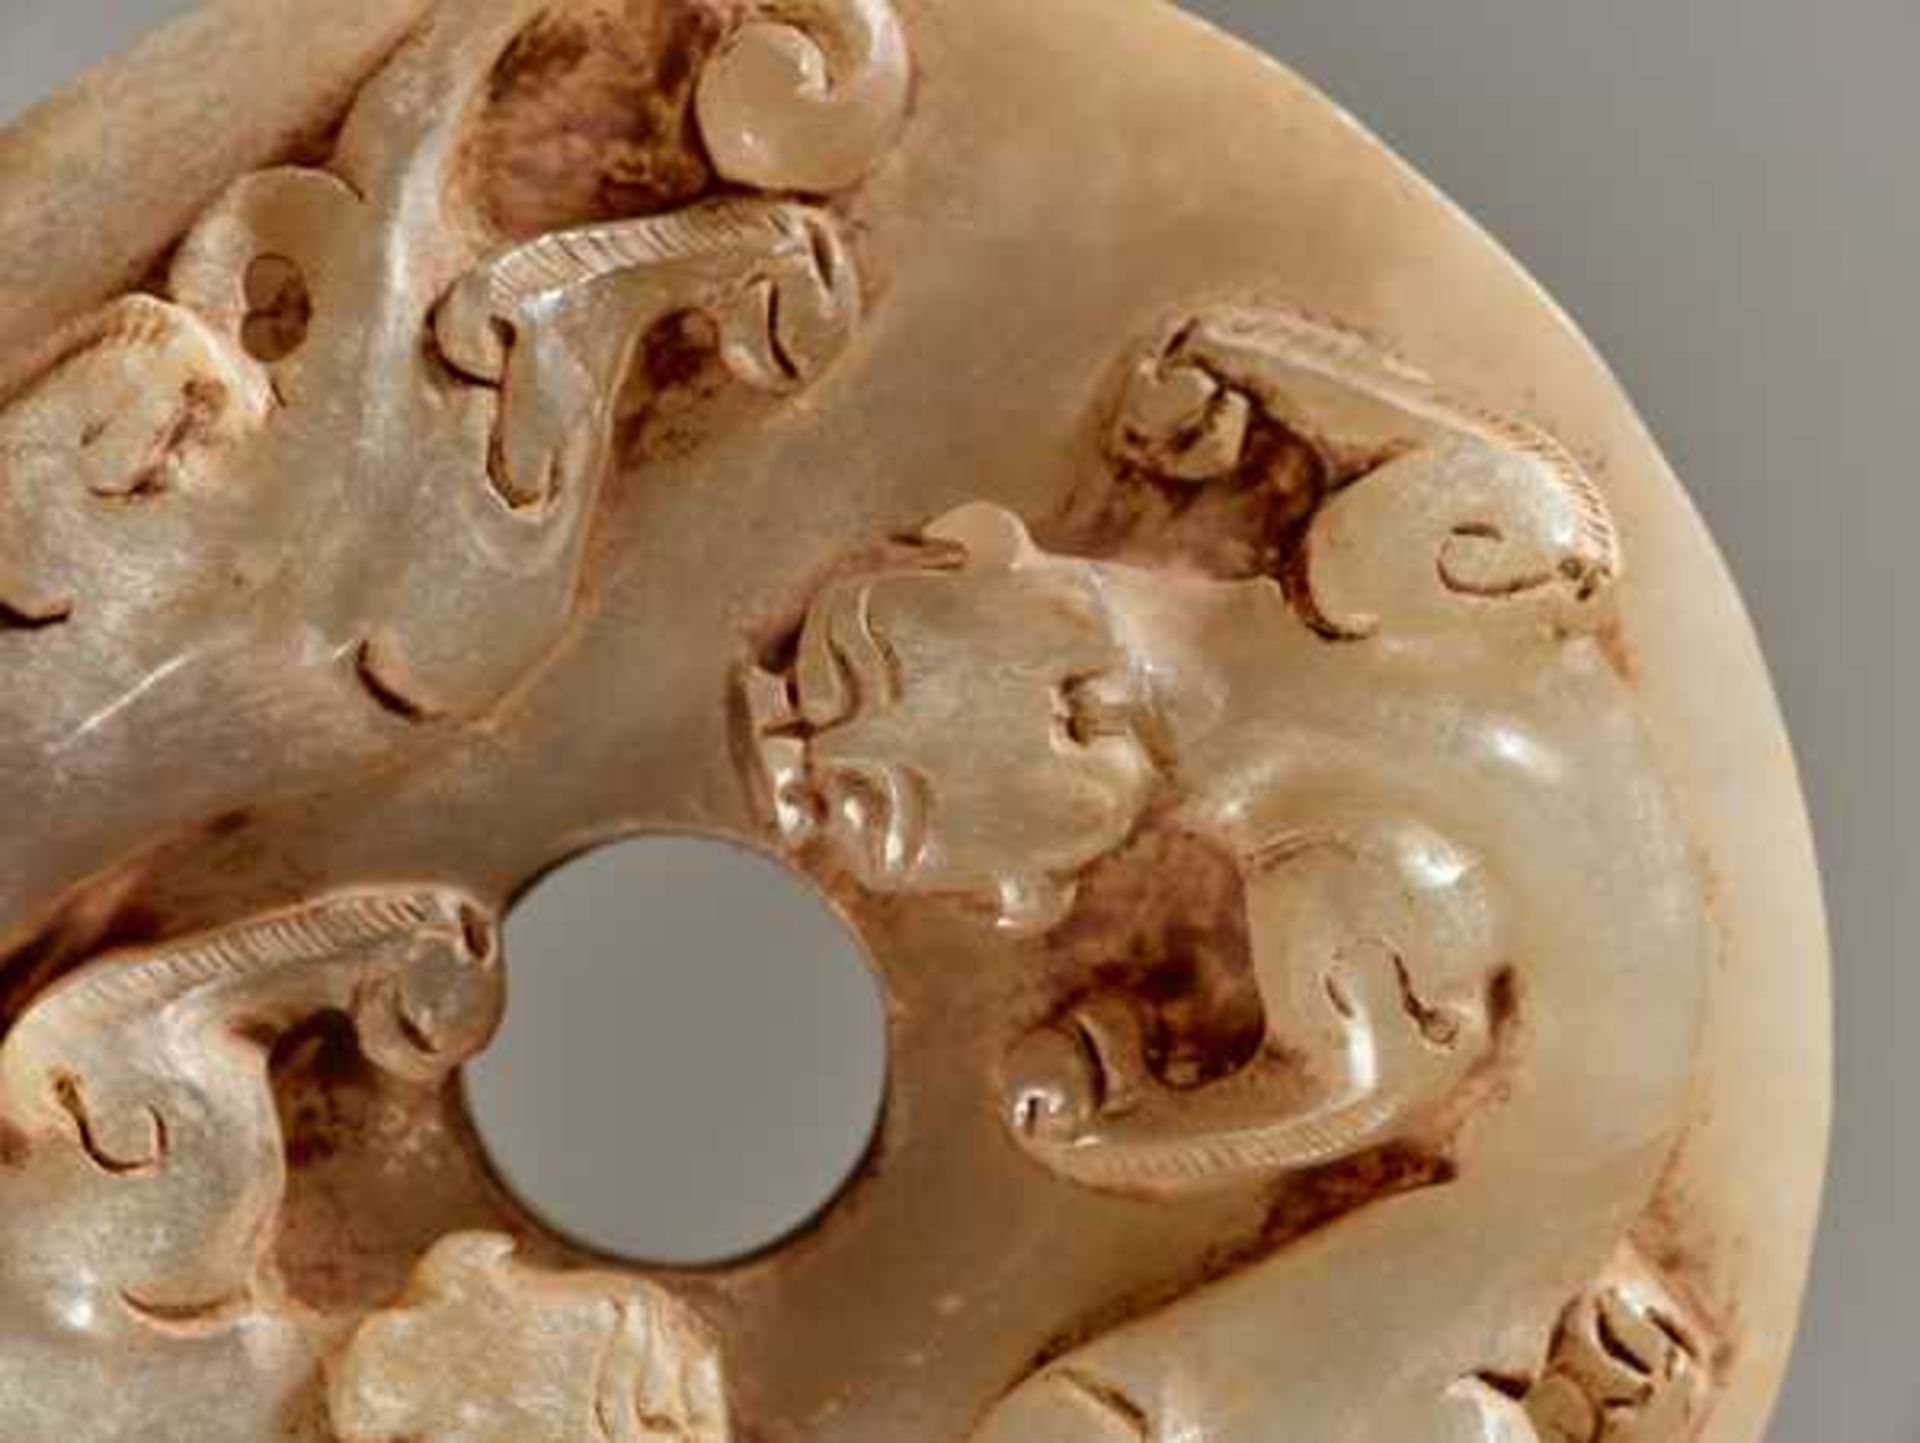 AN IMPRESSIVE WHITE JADE SWORD POMMEL WITH TWO DRAGONS CARVED IN RELIEF Jade, China. Western Han, - Image 4 of 9